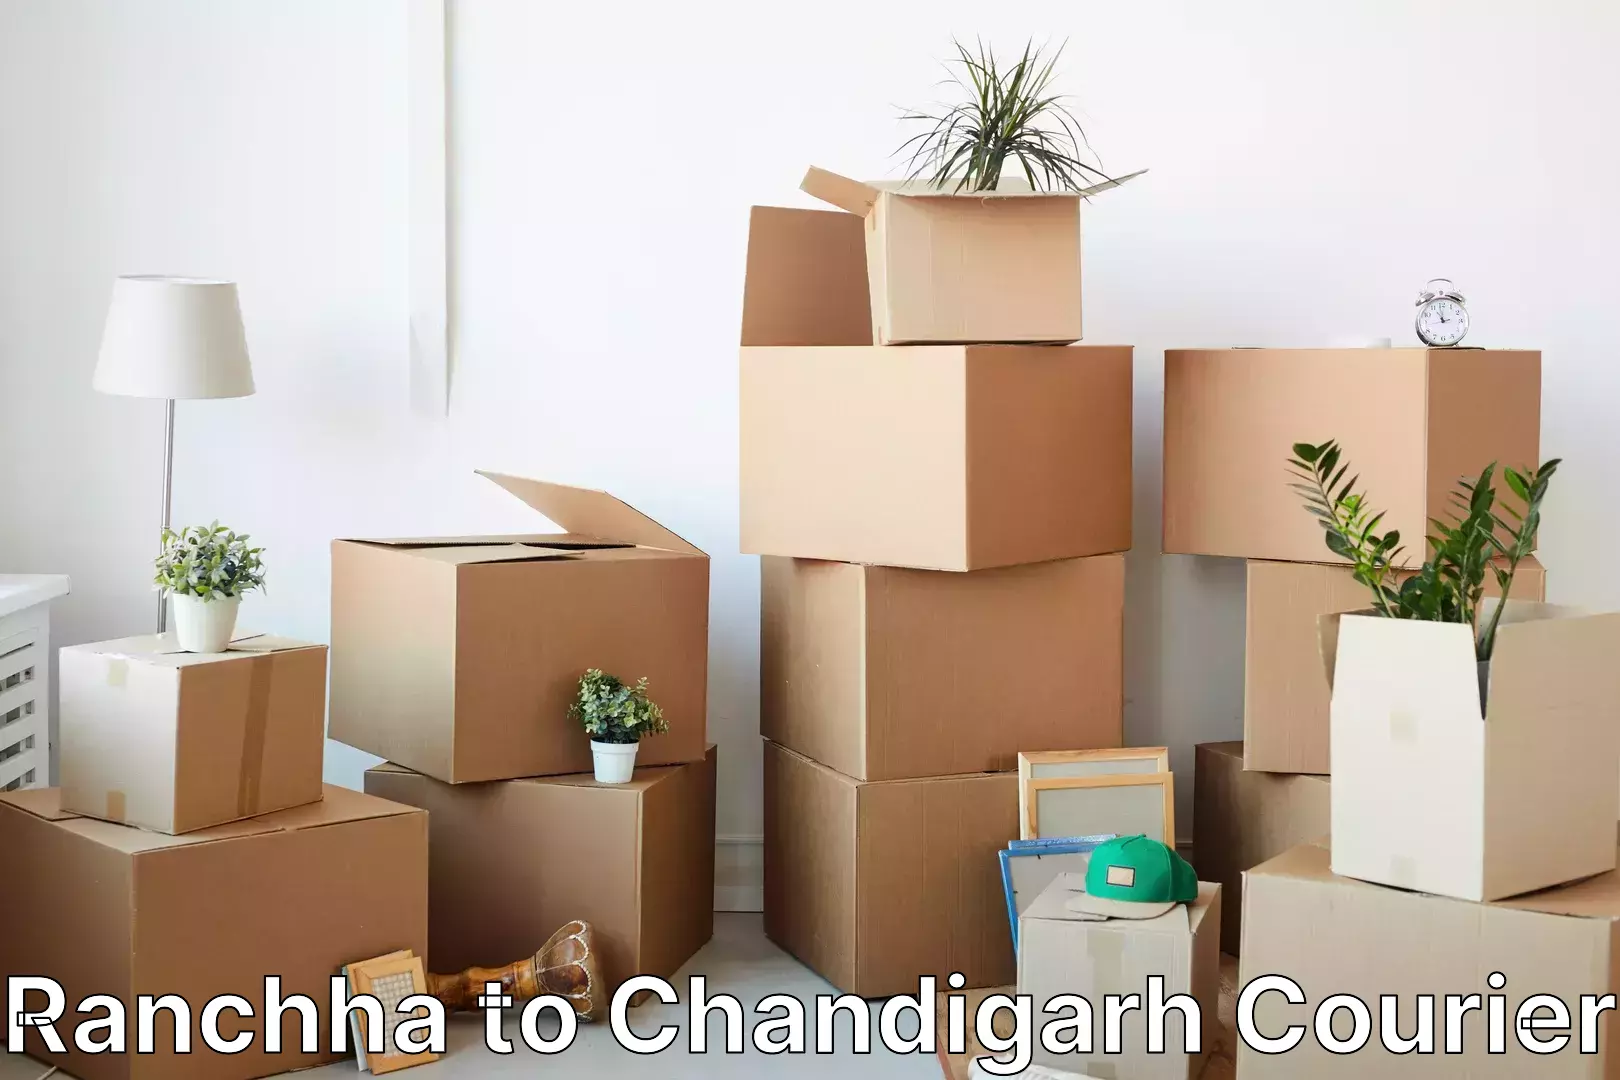 Luggage transport consultancy Ranchha to Chandigarh